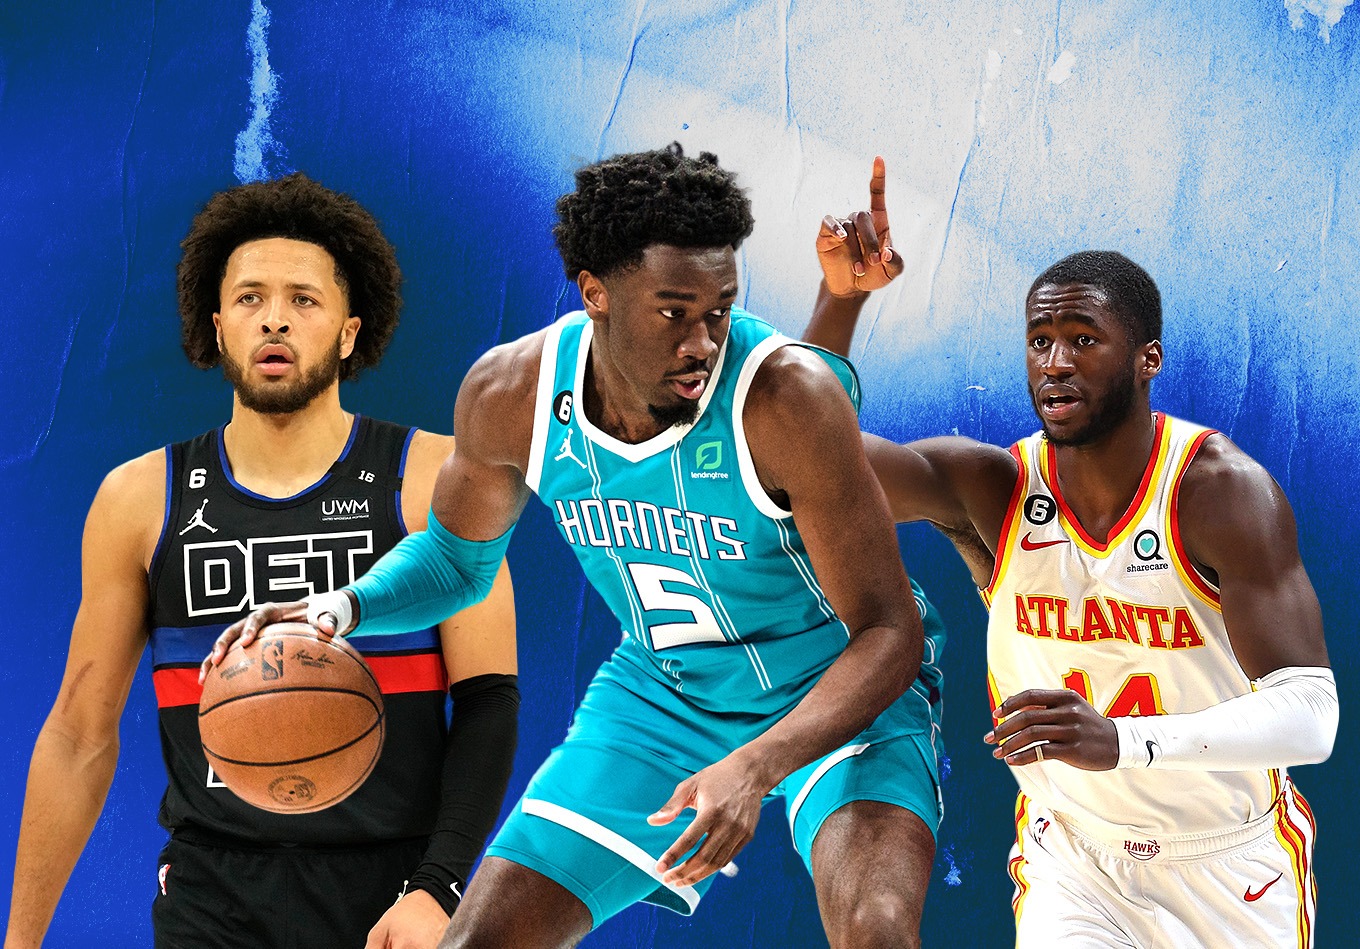 NBA Breakout Players 2023-24: Five Who Appear Ready to Make a Big Leap Forward